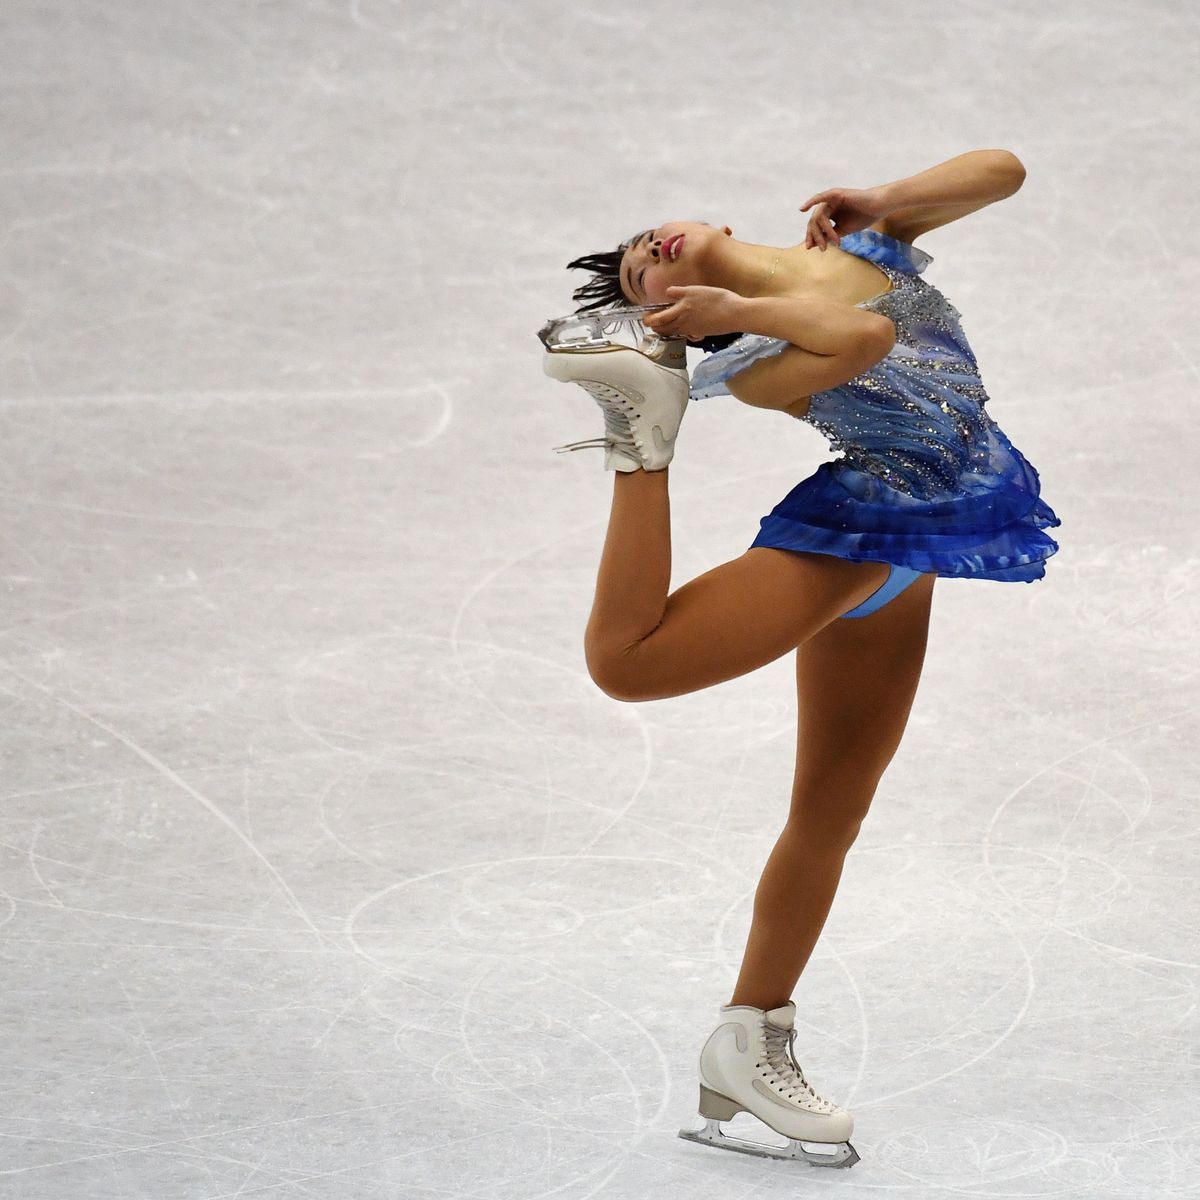 All Figure Skating Jumps, Spins, and Moves, Defined - Figure Skating Terms